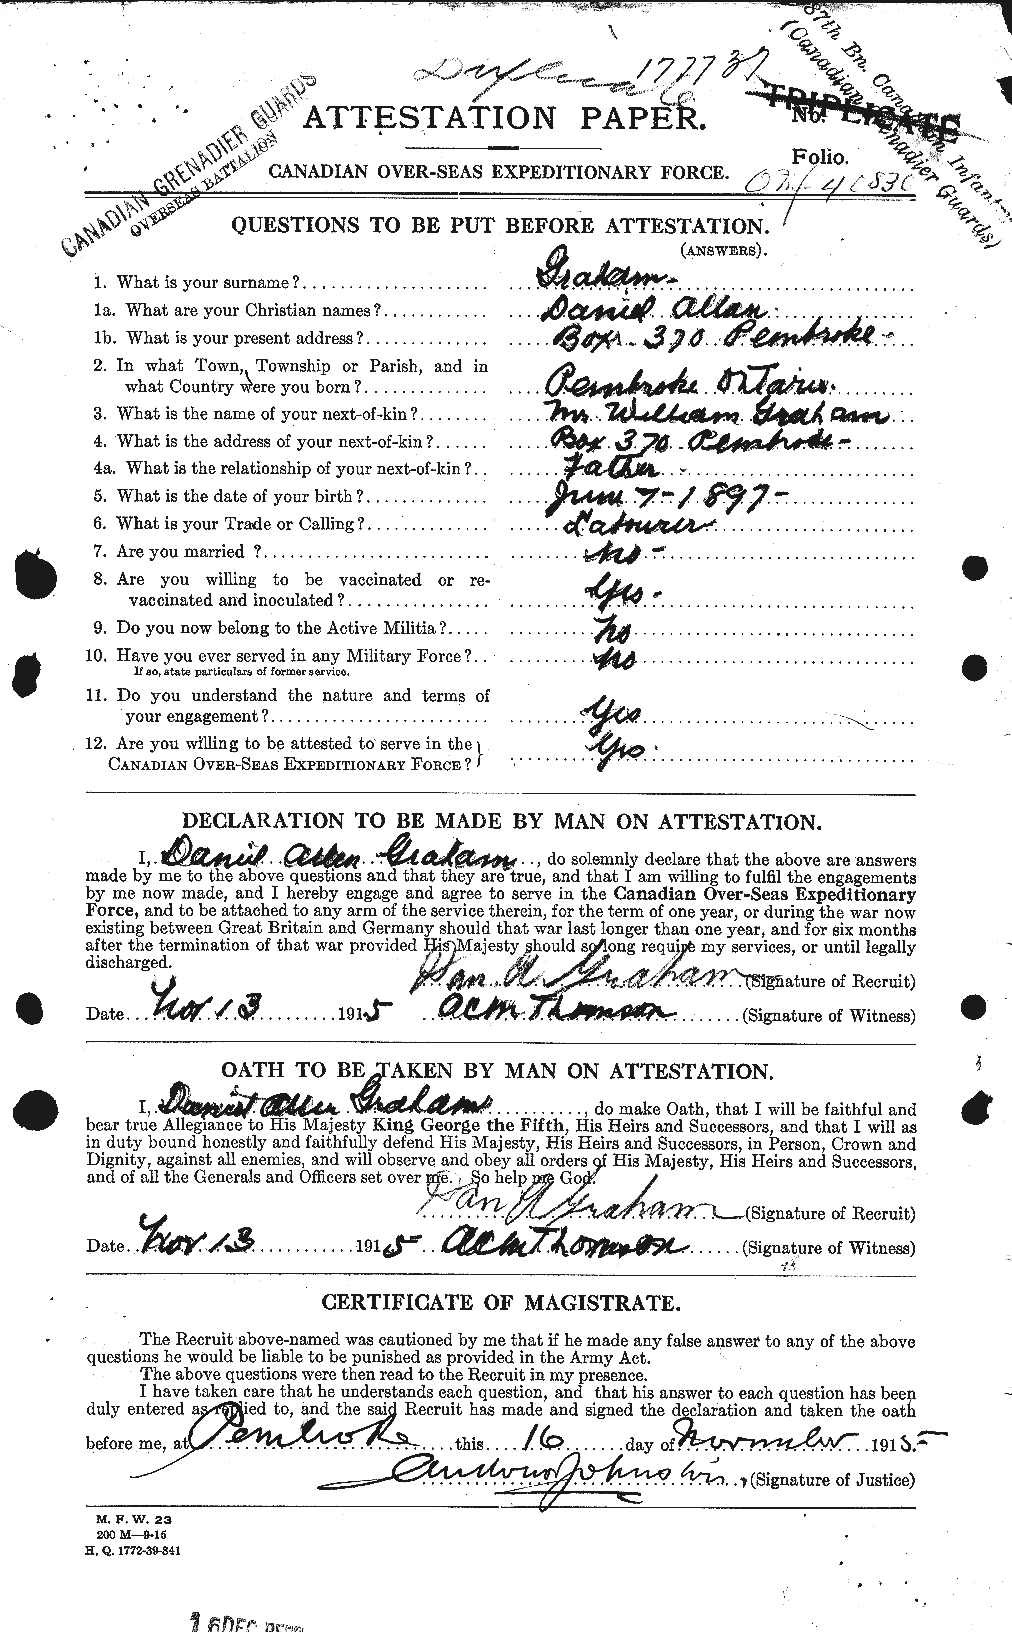 Personnel Records of the First World War - CEF 353811a